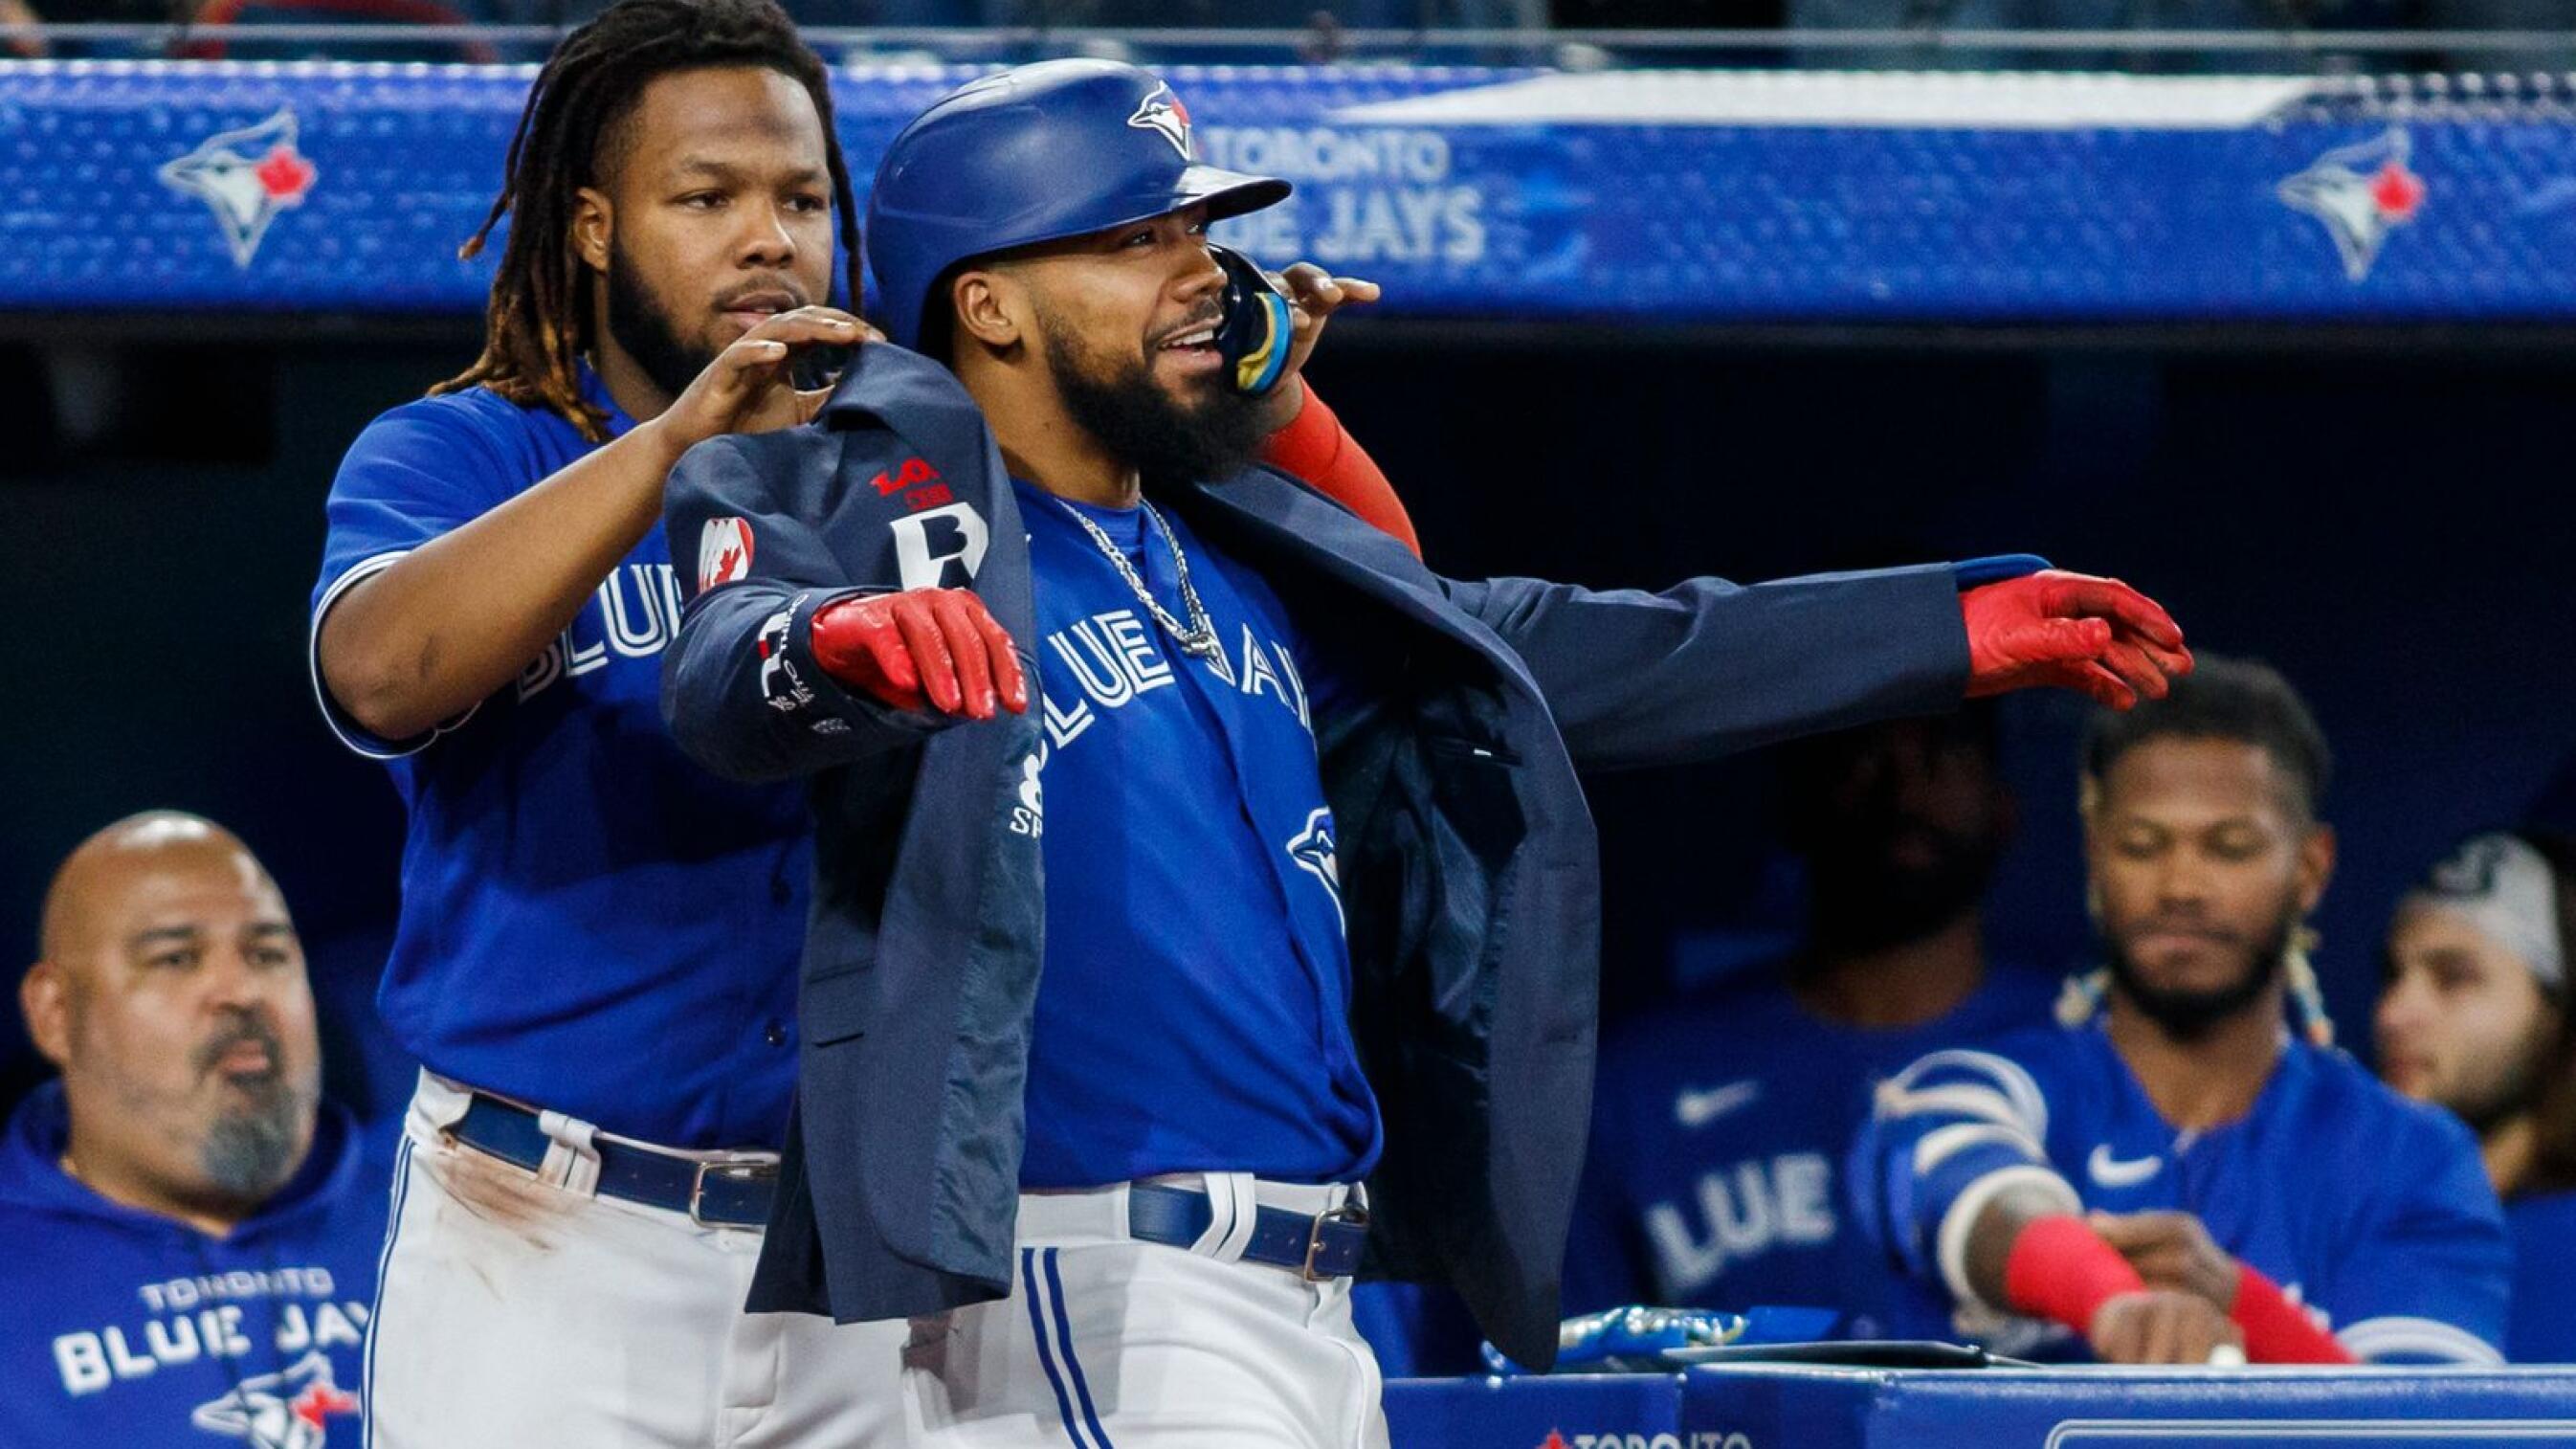 Blue Jays win 9th straight over Red Sox